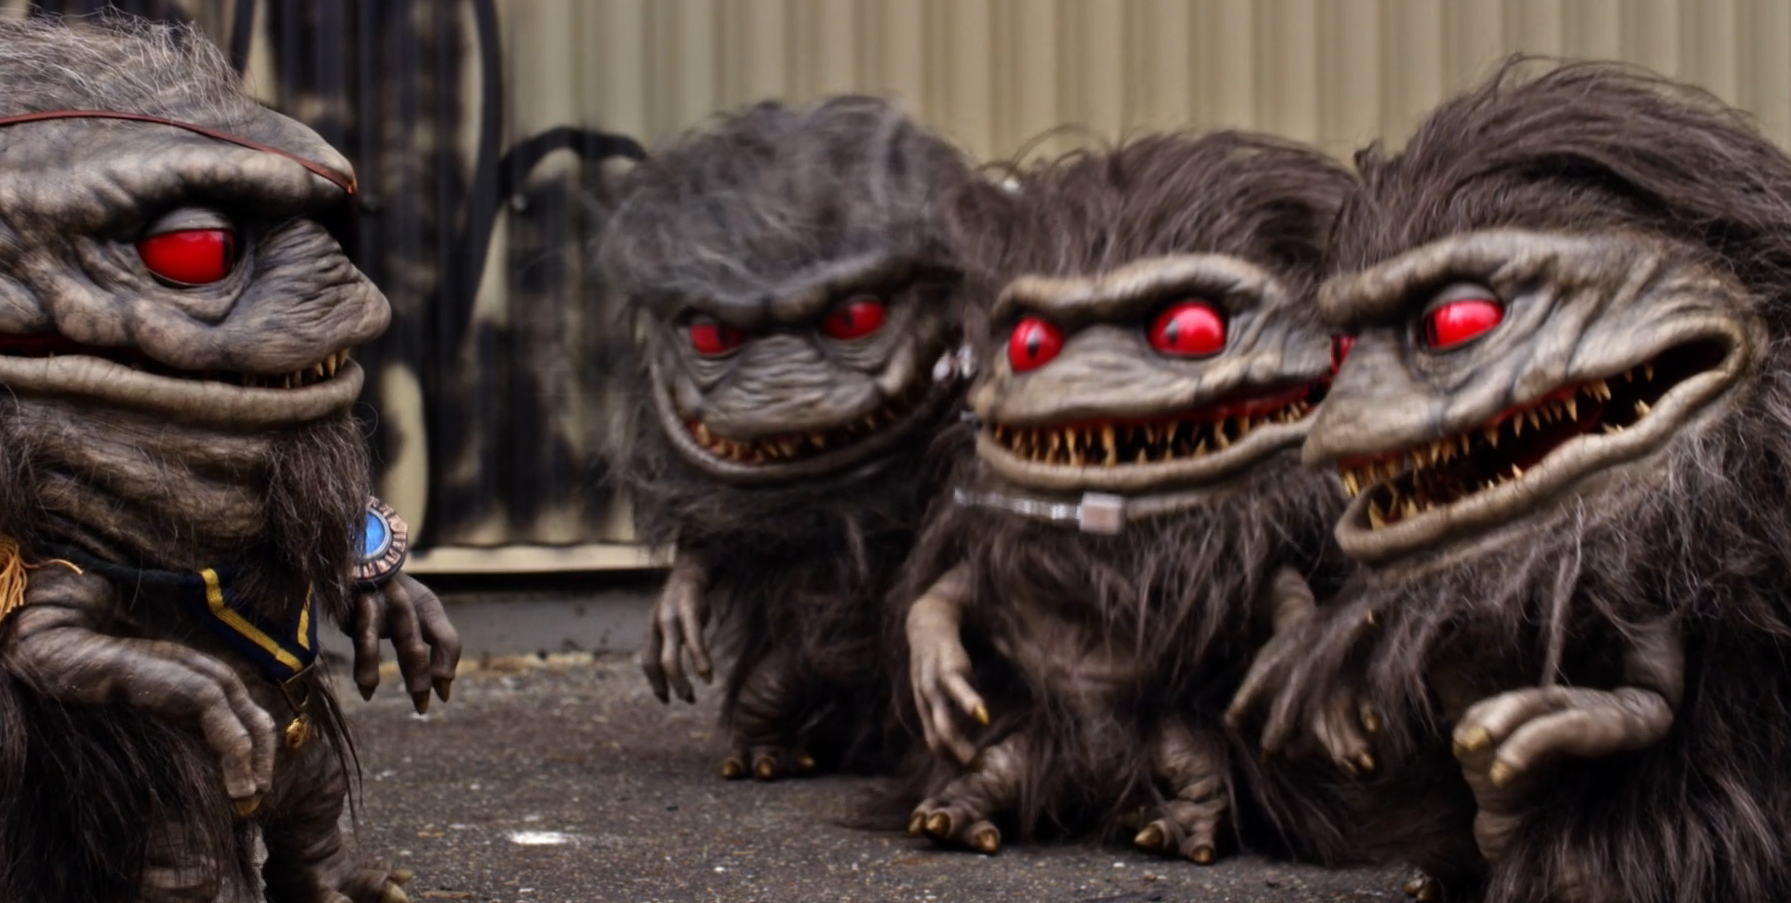 https://bloody-disgusting.com/wp-content/uploads/2019/03/critters-new-binge.png